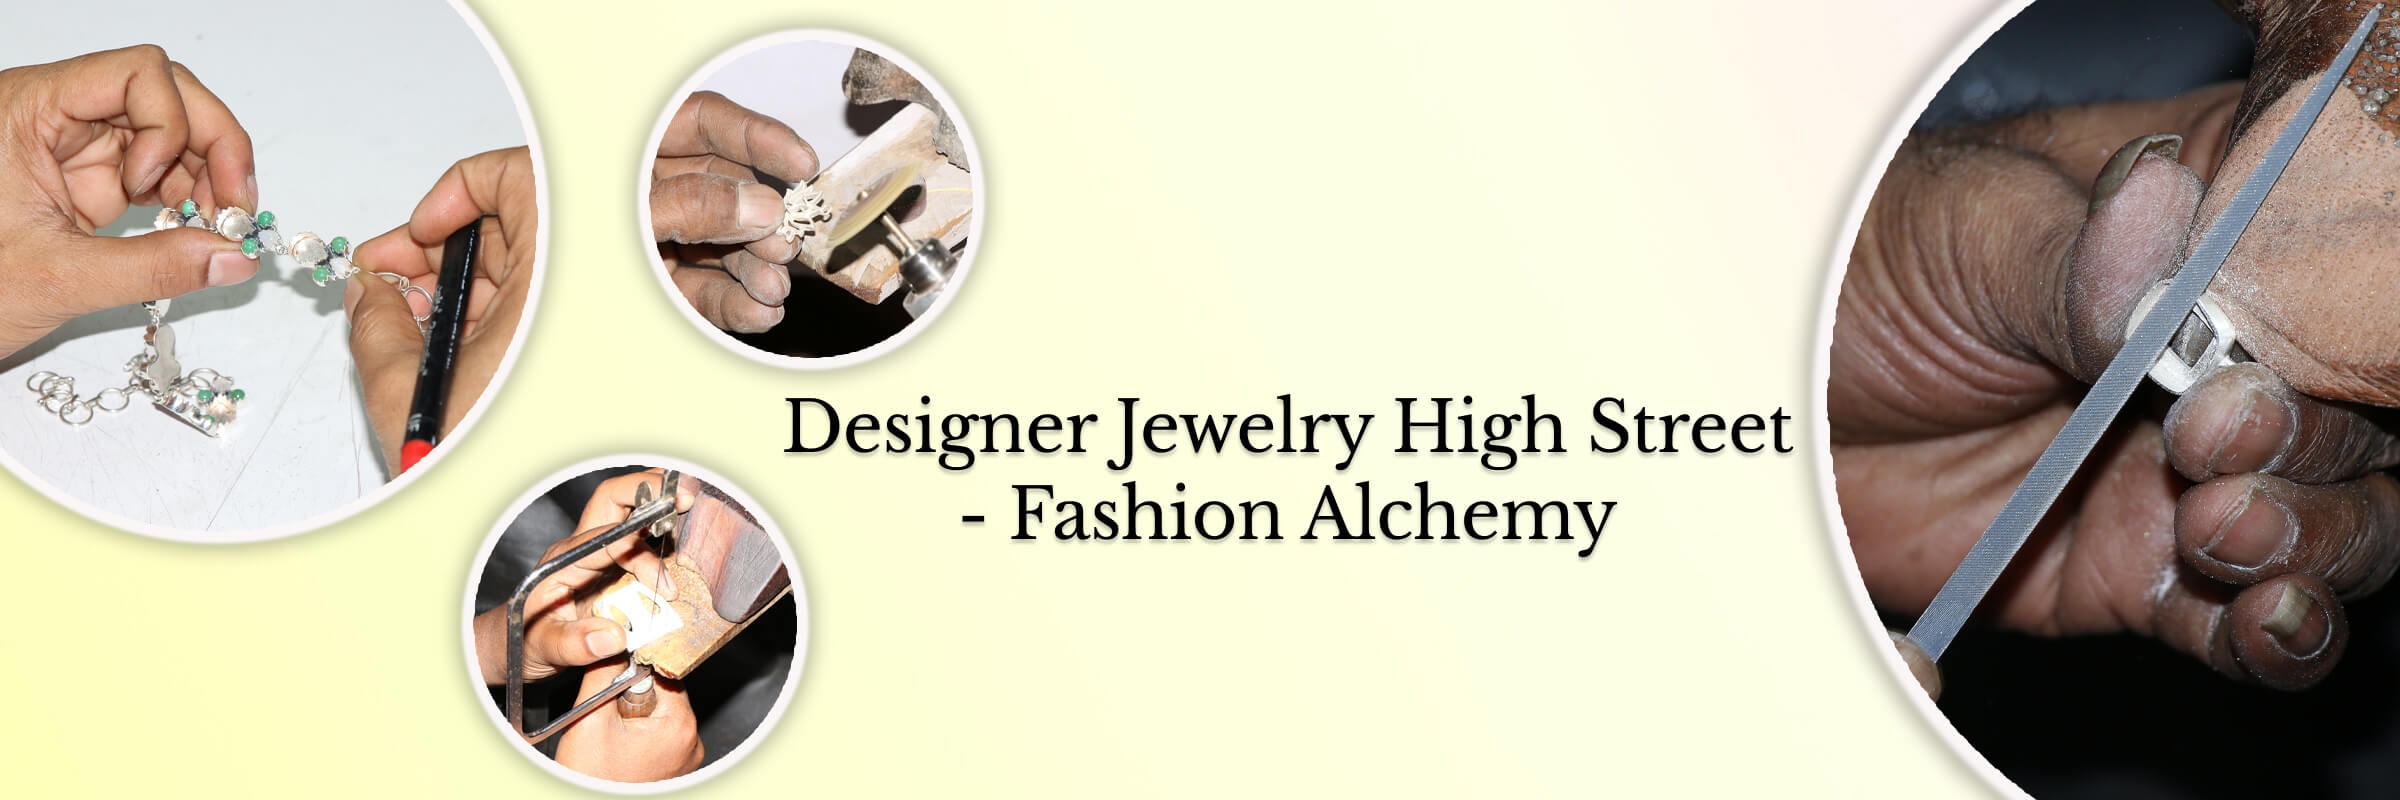 Mixing Designer Jewelry with High Street Fashion to create a signature look